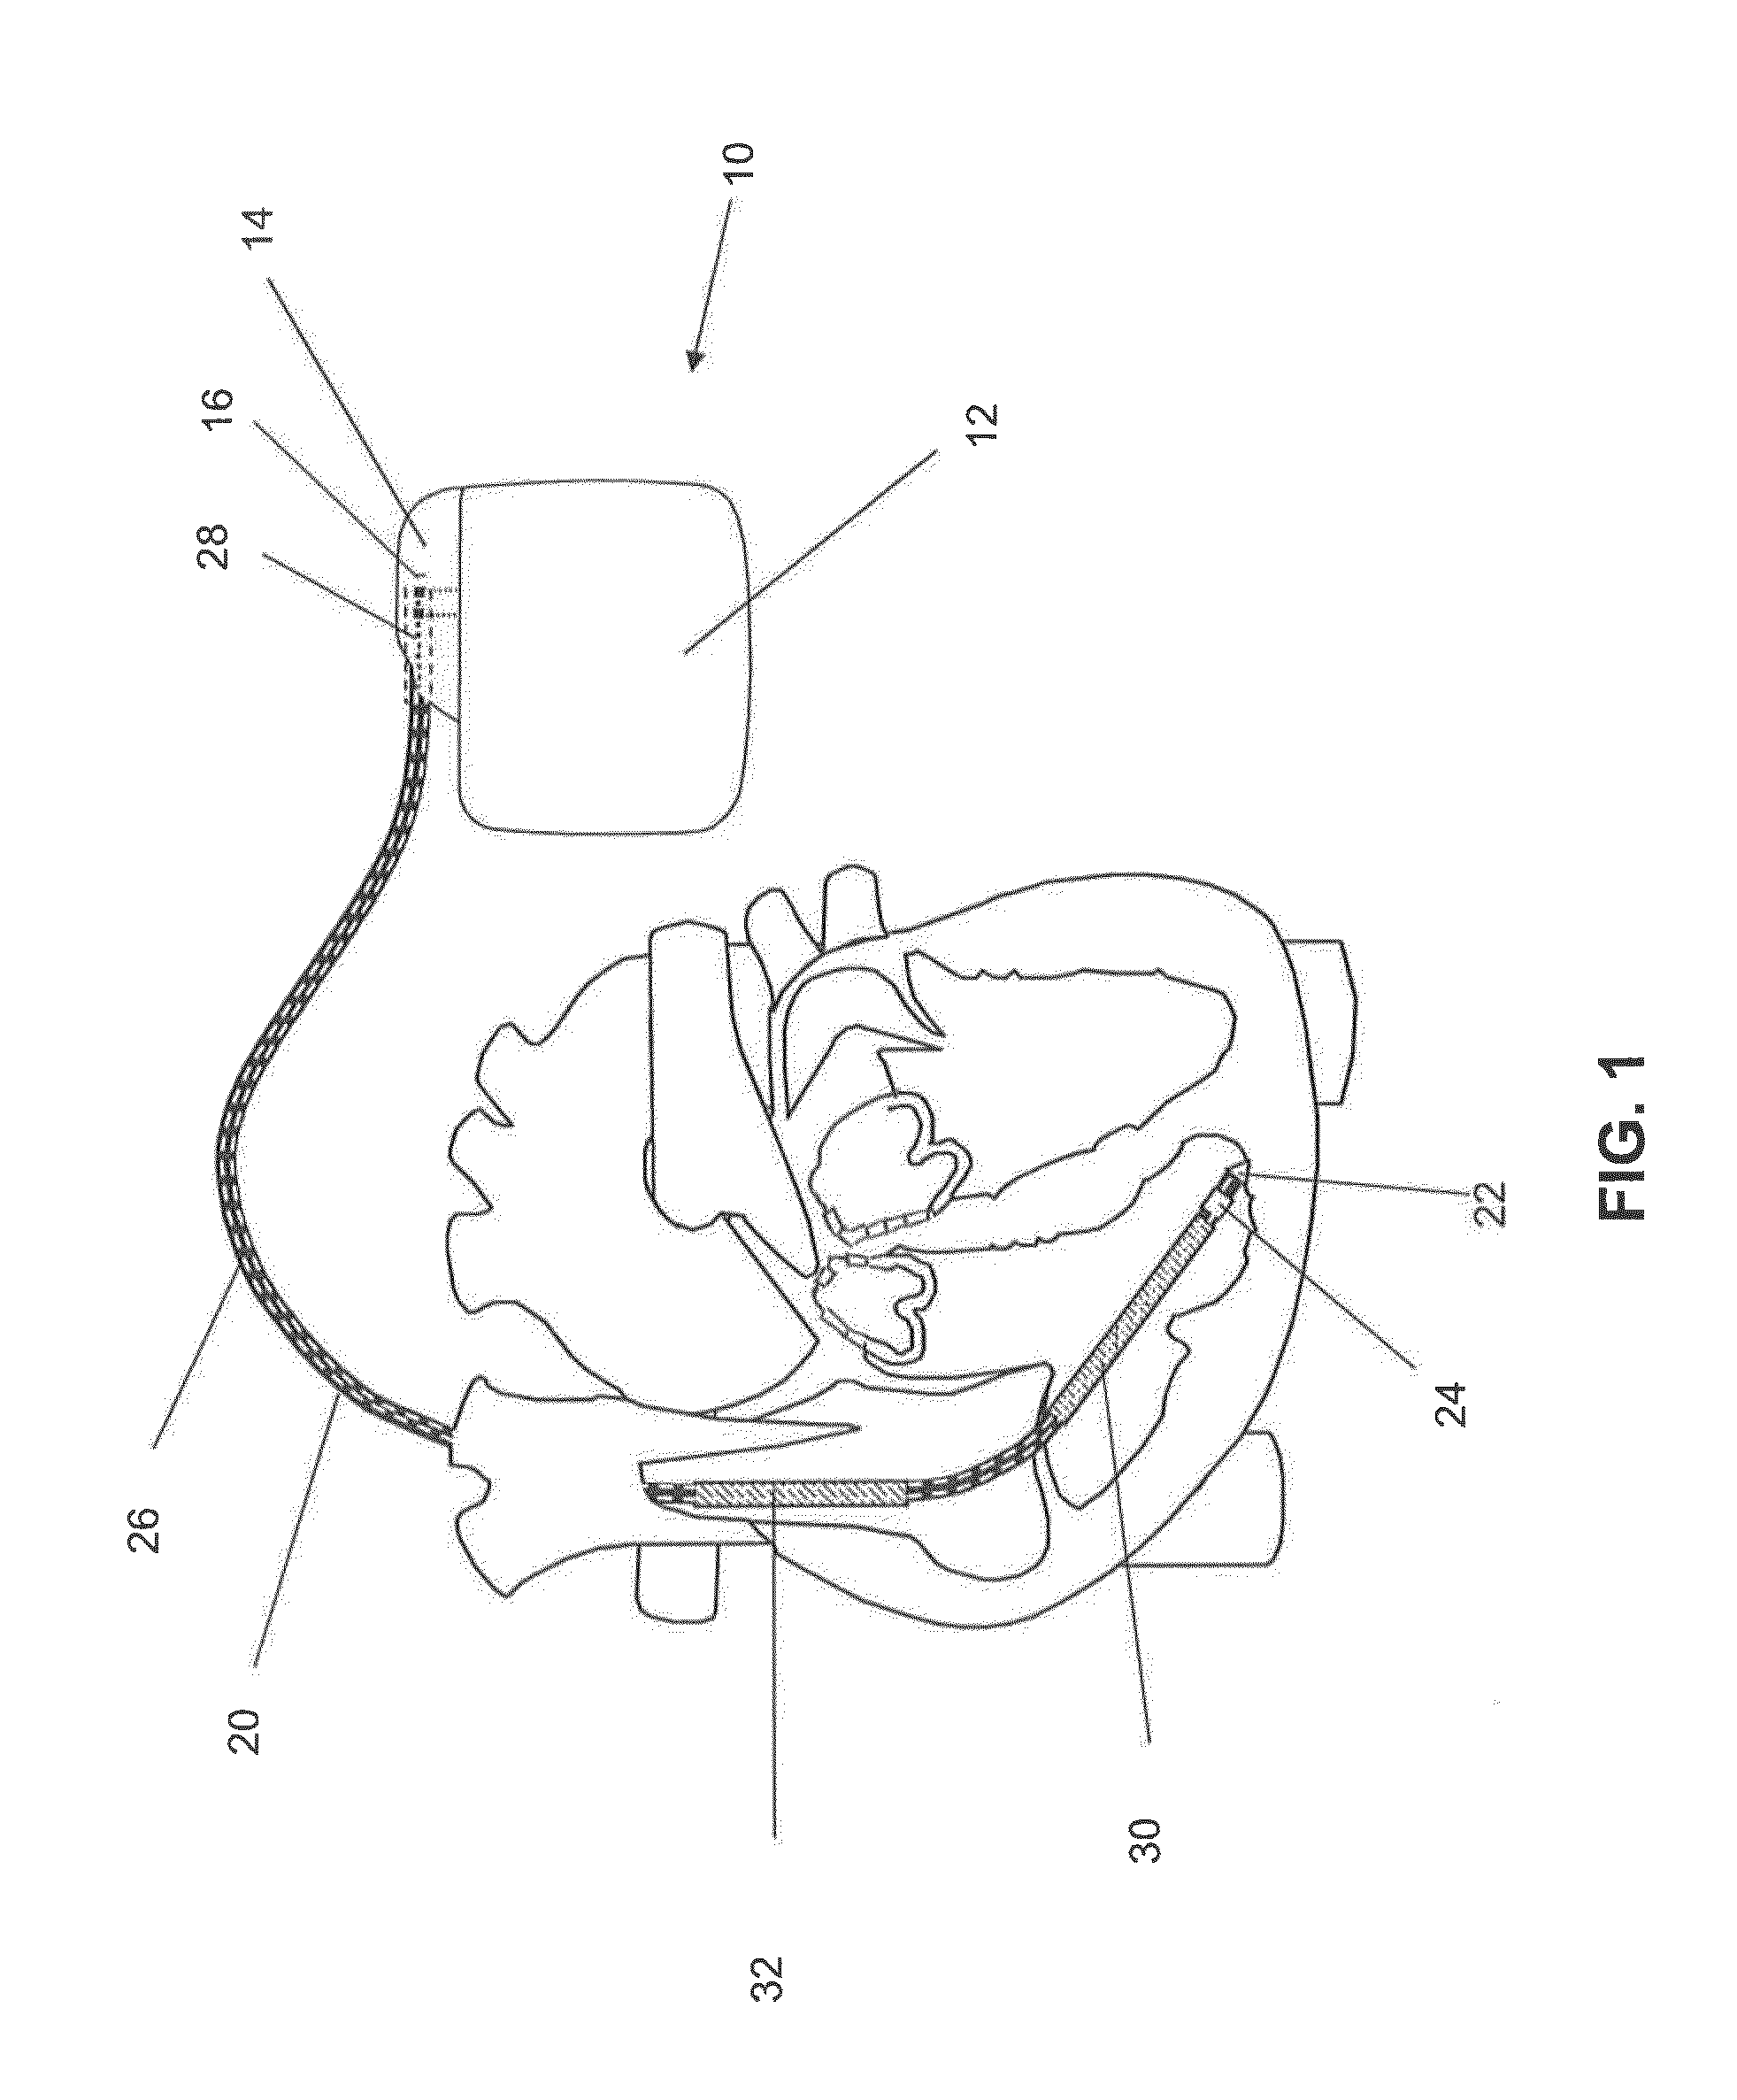 Implantable device with electrical filter